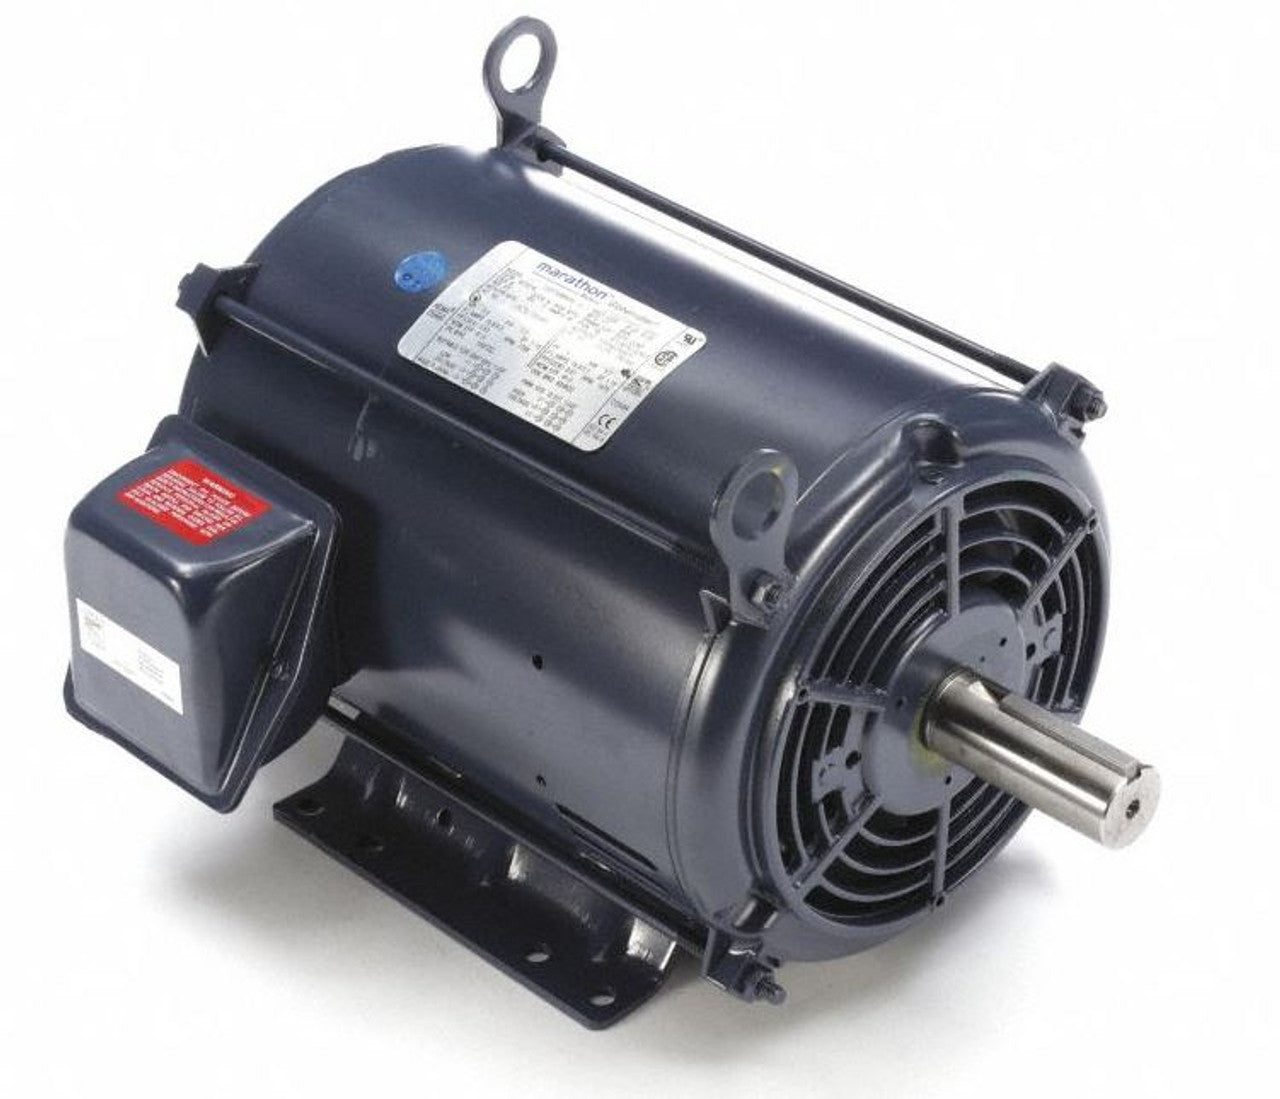 MARATHON 213TTDBD6026: High-Performance Electric Motor for Industrial Excellence